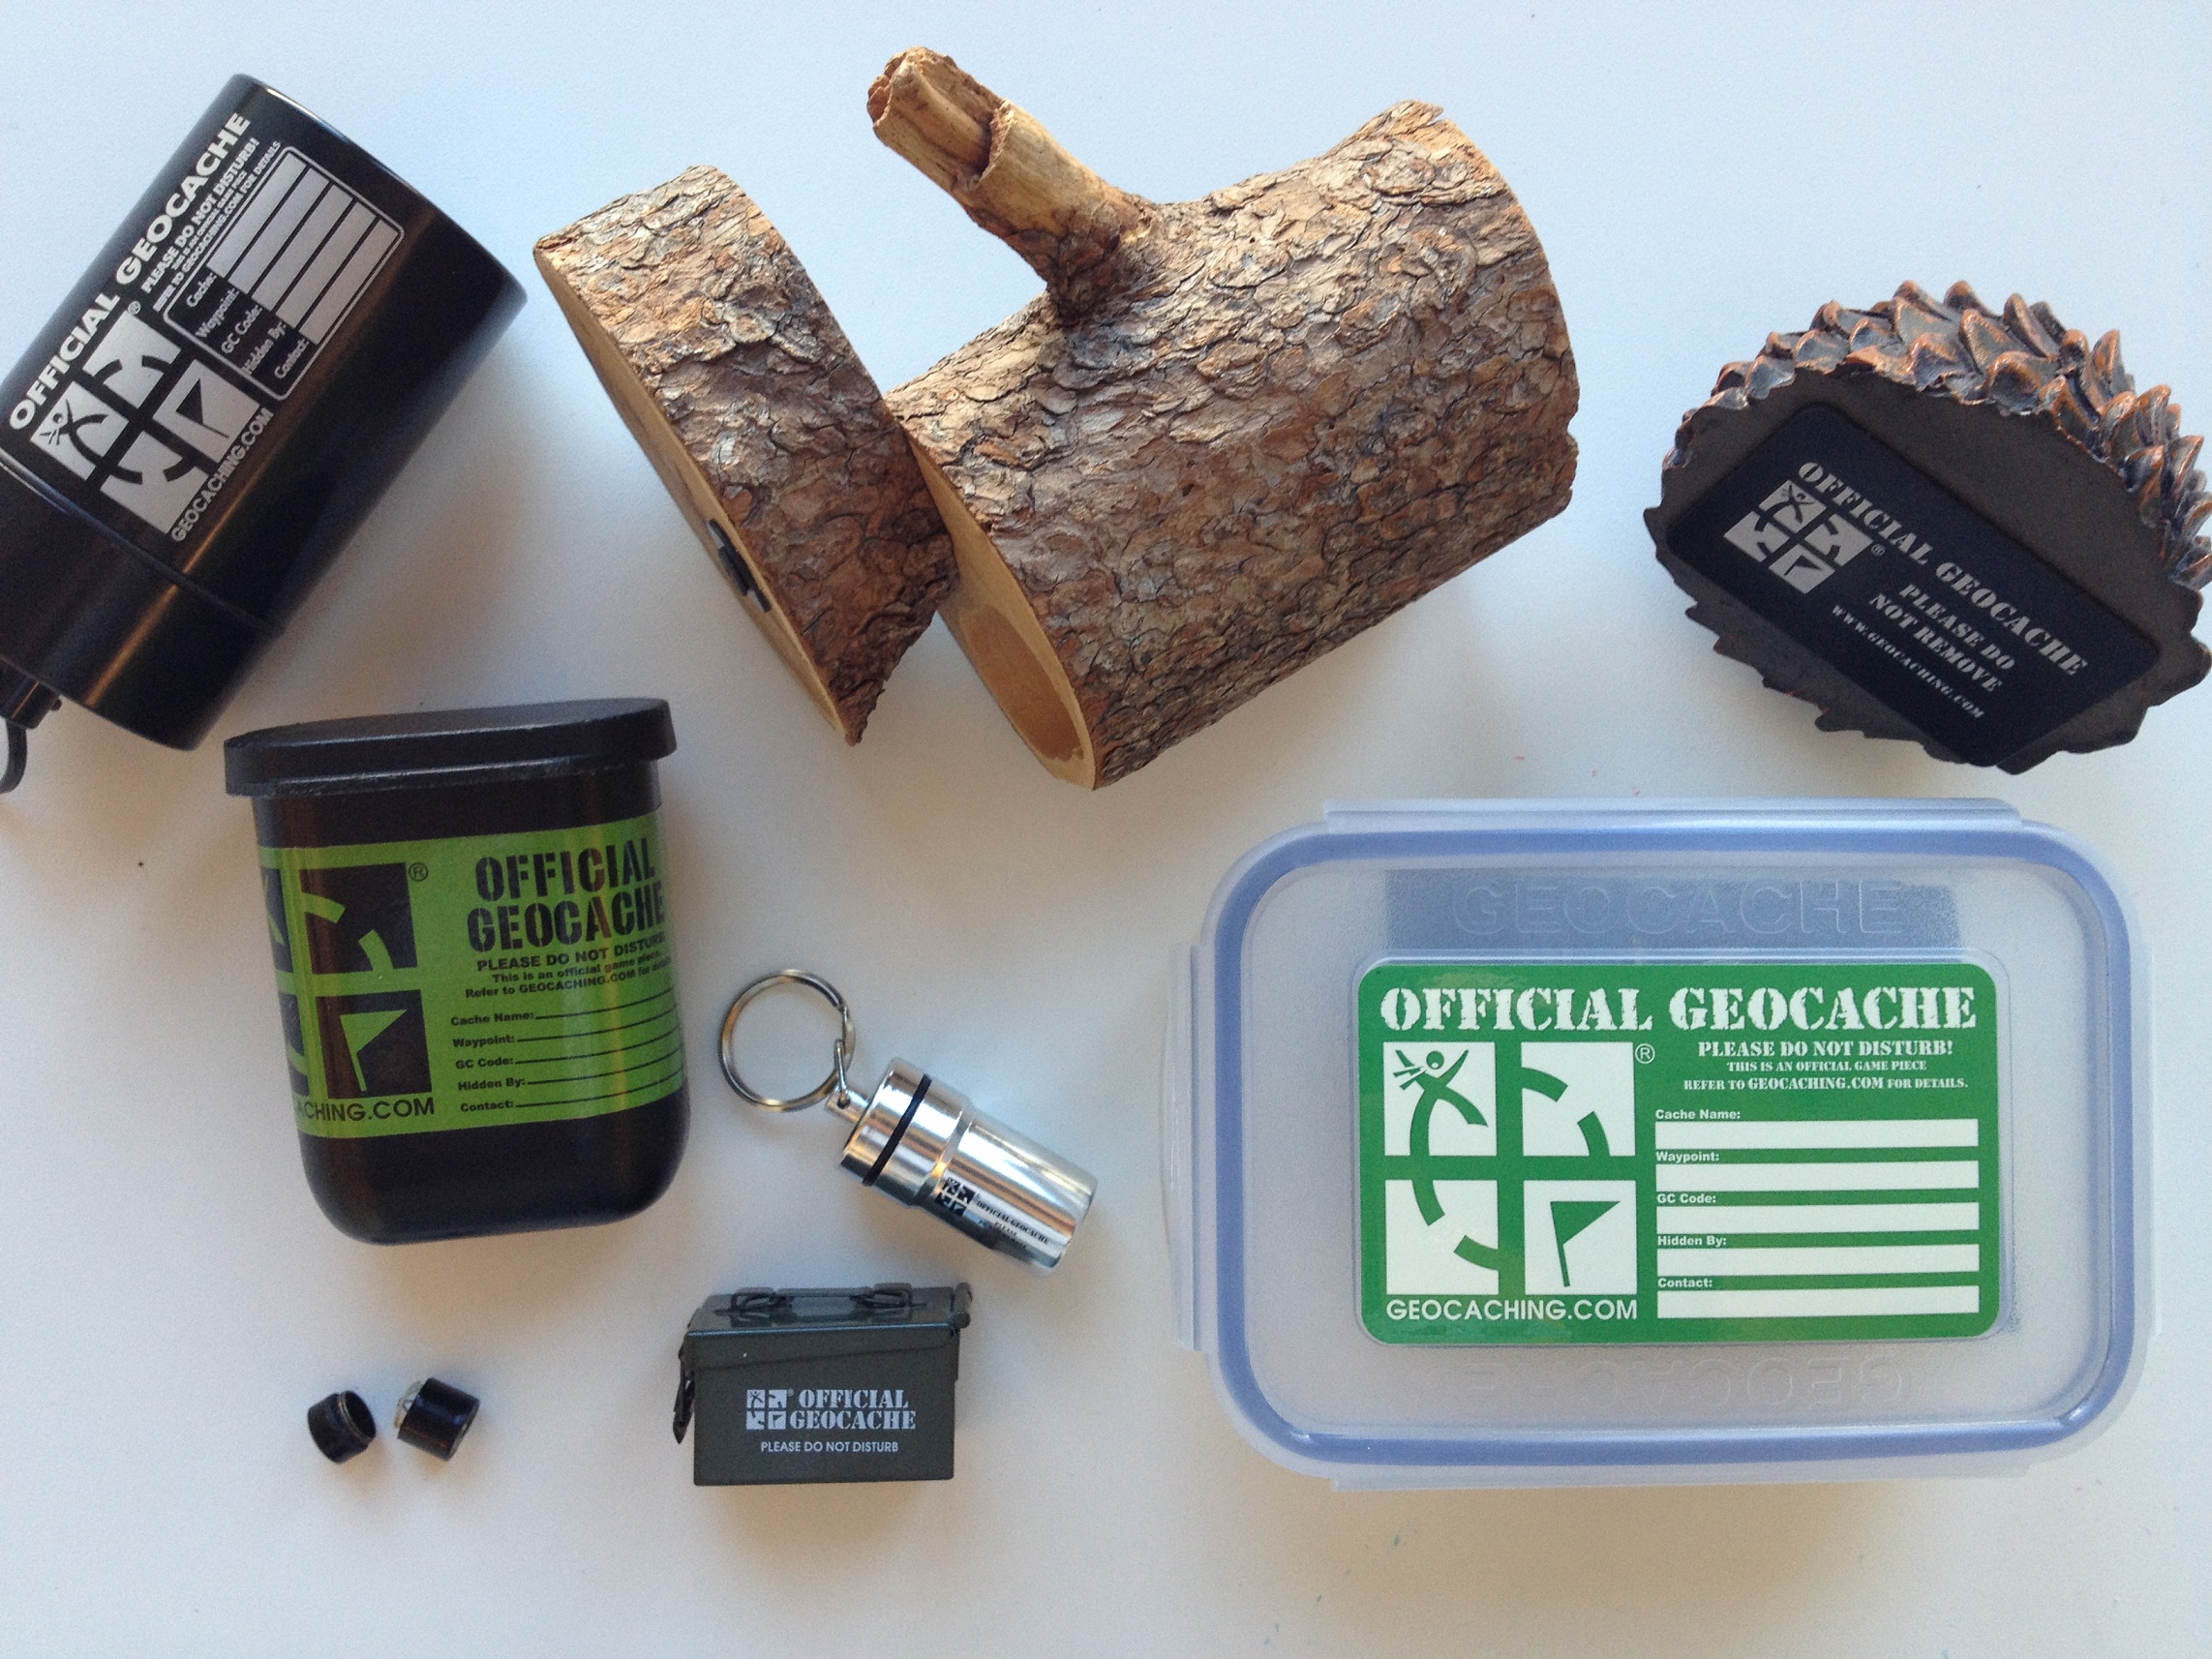 A Geocaching Beginner's Guide – Geocache Container Pictures